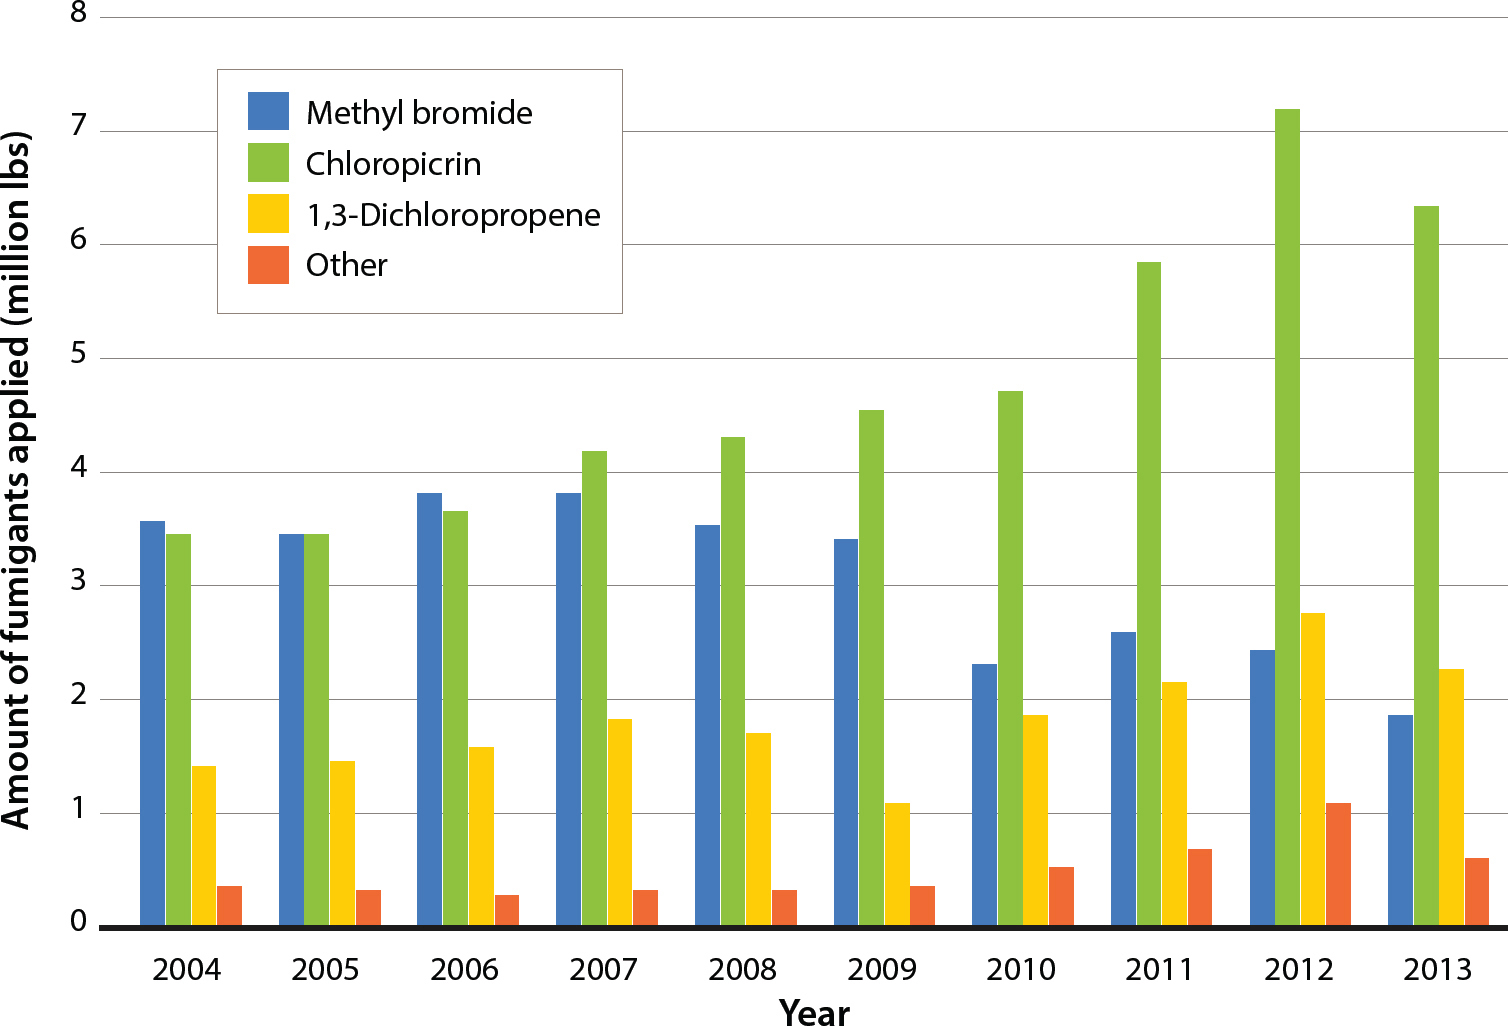 Pounds of fumigants applied for nine counties in the study, 2004 to 2013. Source: California pesticide use reporting program (www.cdpr.ca.gov/docs/pur/purmain.htm).